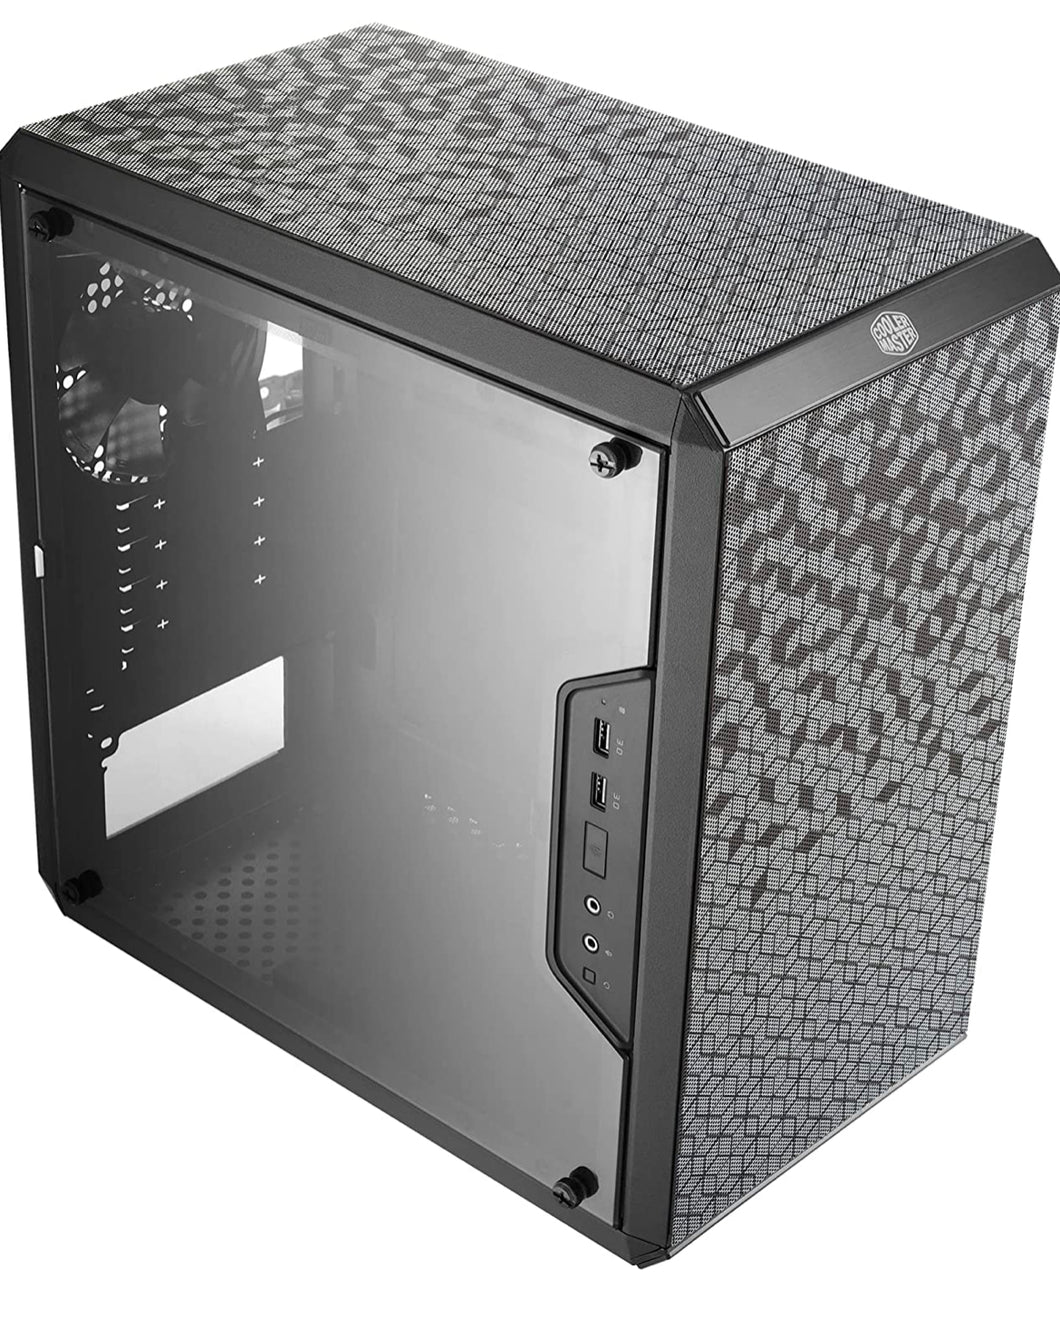 Cooler Master MasterBox Q300L Micro-ATX Tower with Magnetic Design Dust Filter, Transparent Acrylic Side Panel, Adjustable I/O & Fully Ventilated Airflow, Black- NEW IN BOX!!!!